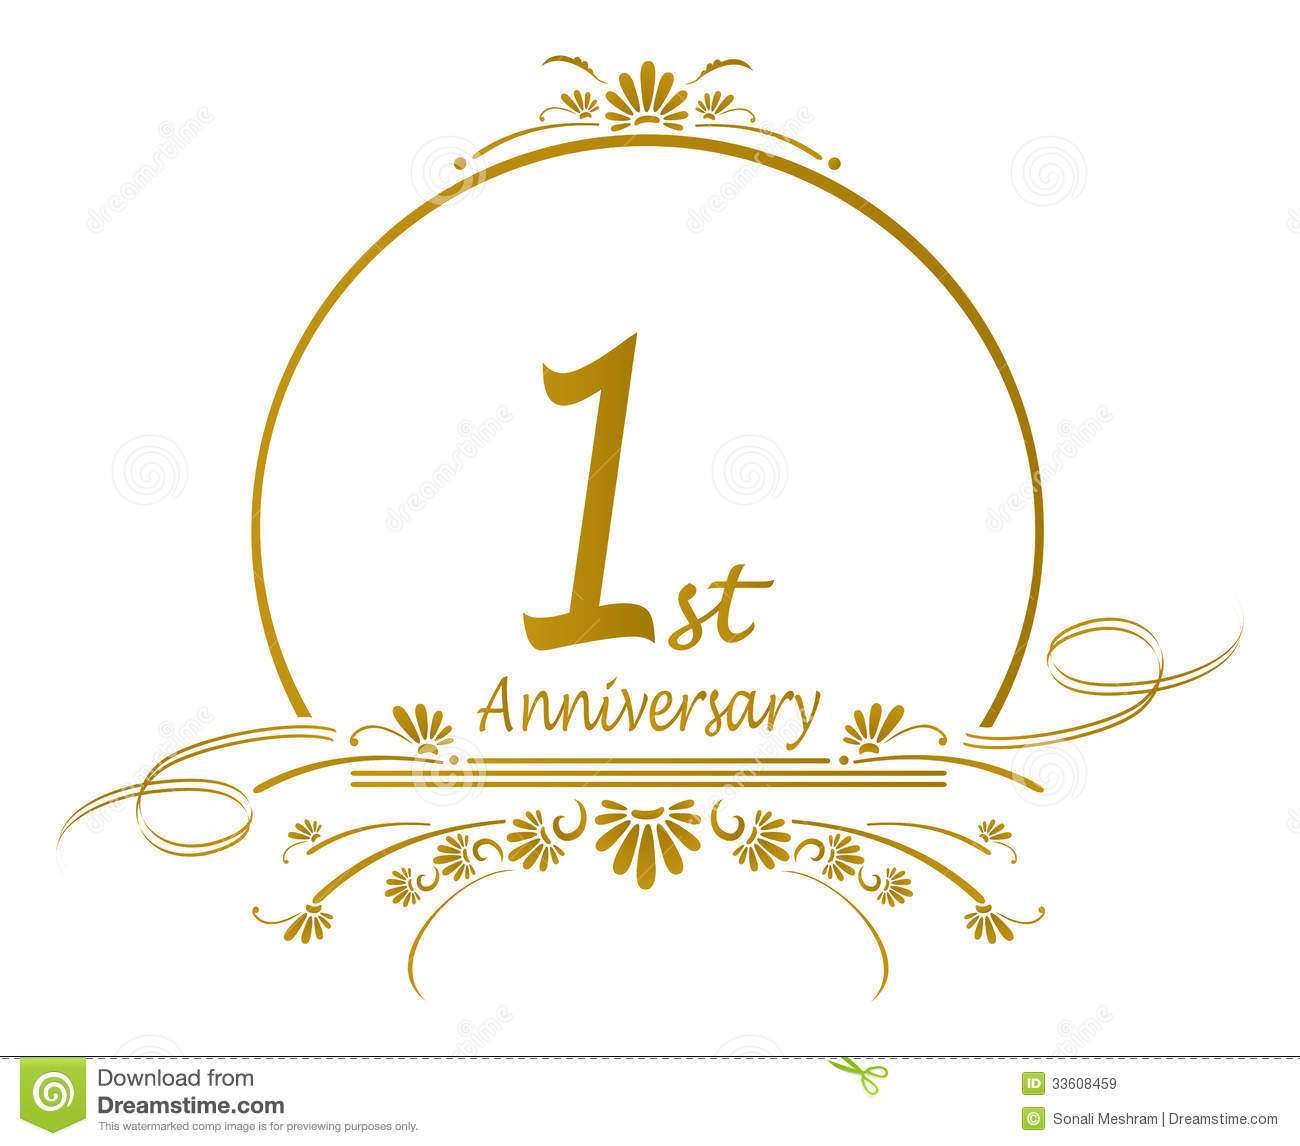 1st Anniversary Design Royalty Free Stock Images   Image  33608459